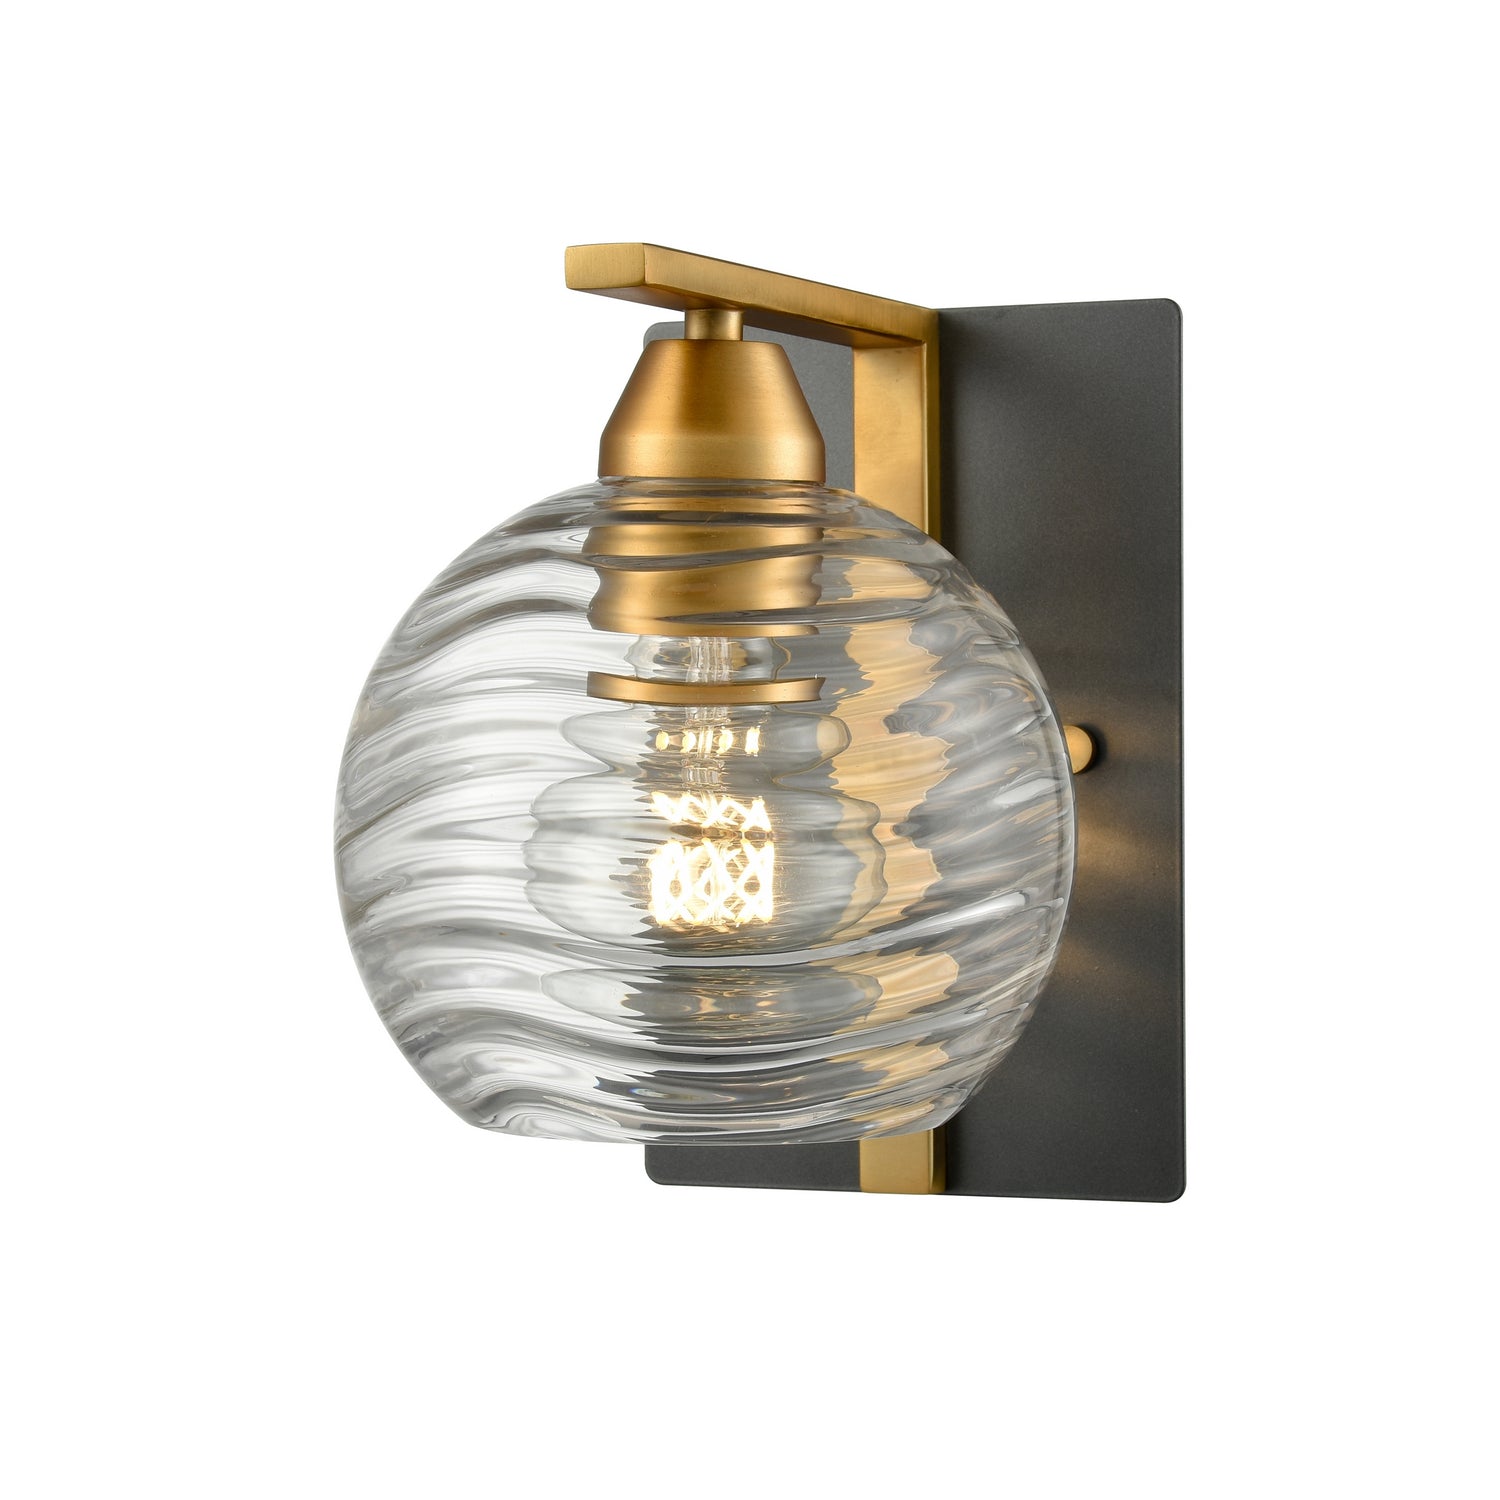 DVI Canada - One Light Wall Sconce - Tropea - Brass And Graphite With Ripple Glass- Union Lighting Luminaires Decor